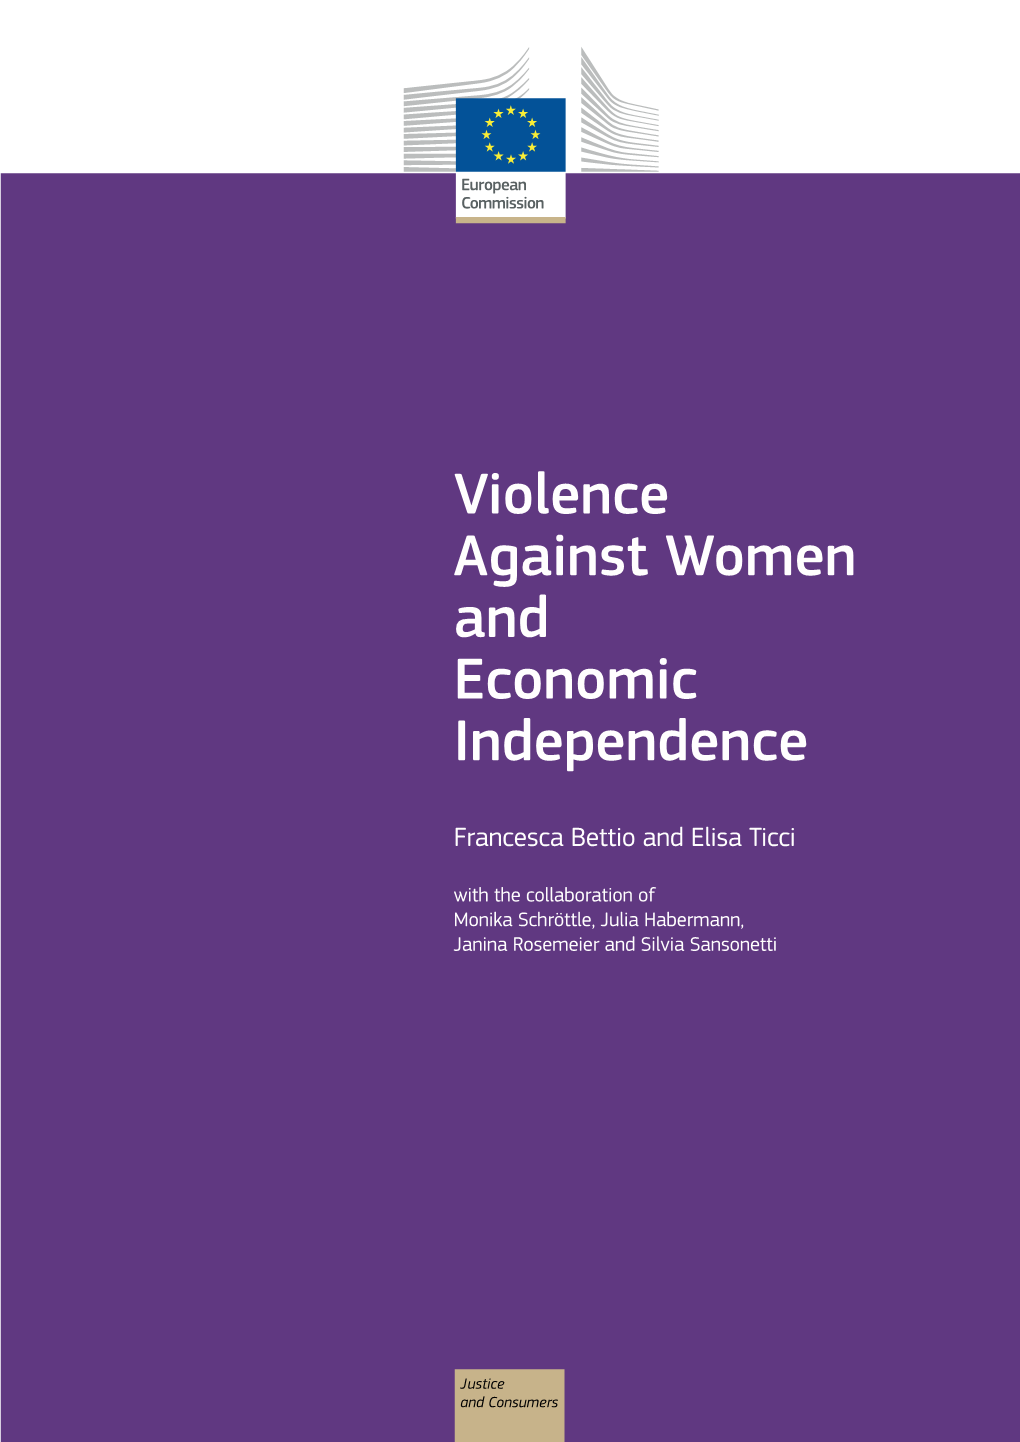 Violence Against Women and Economic Independence